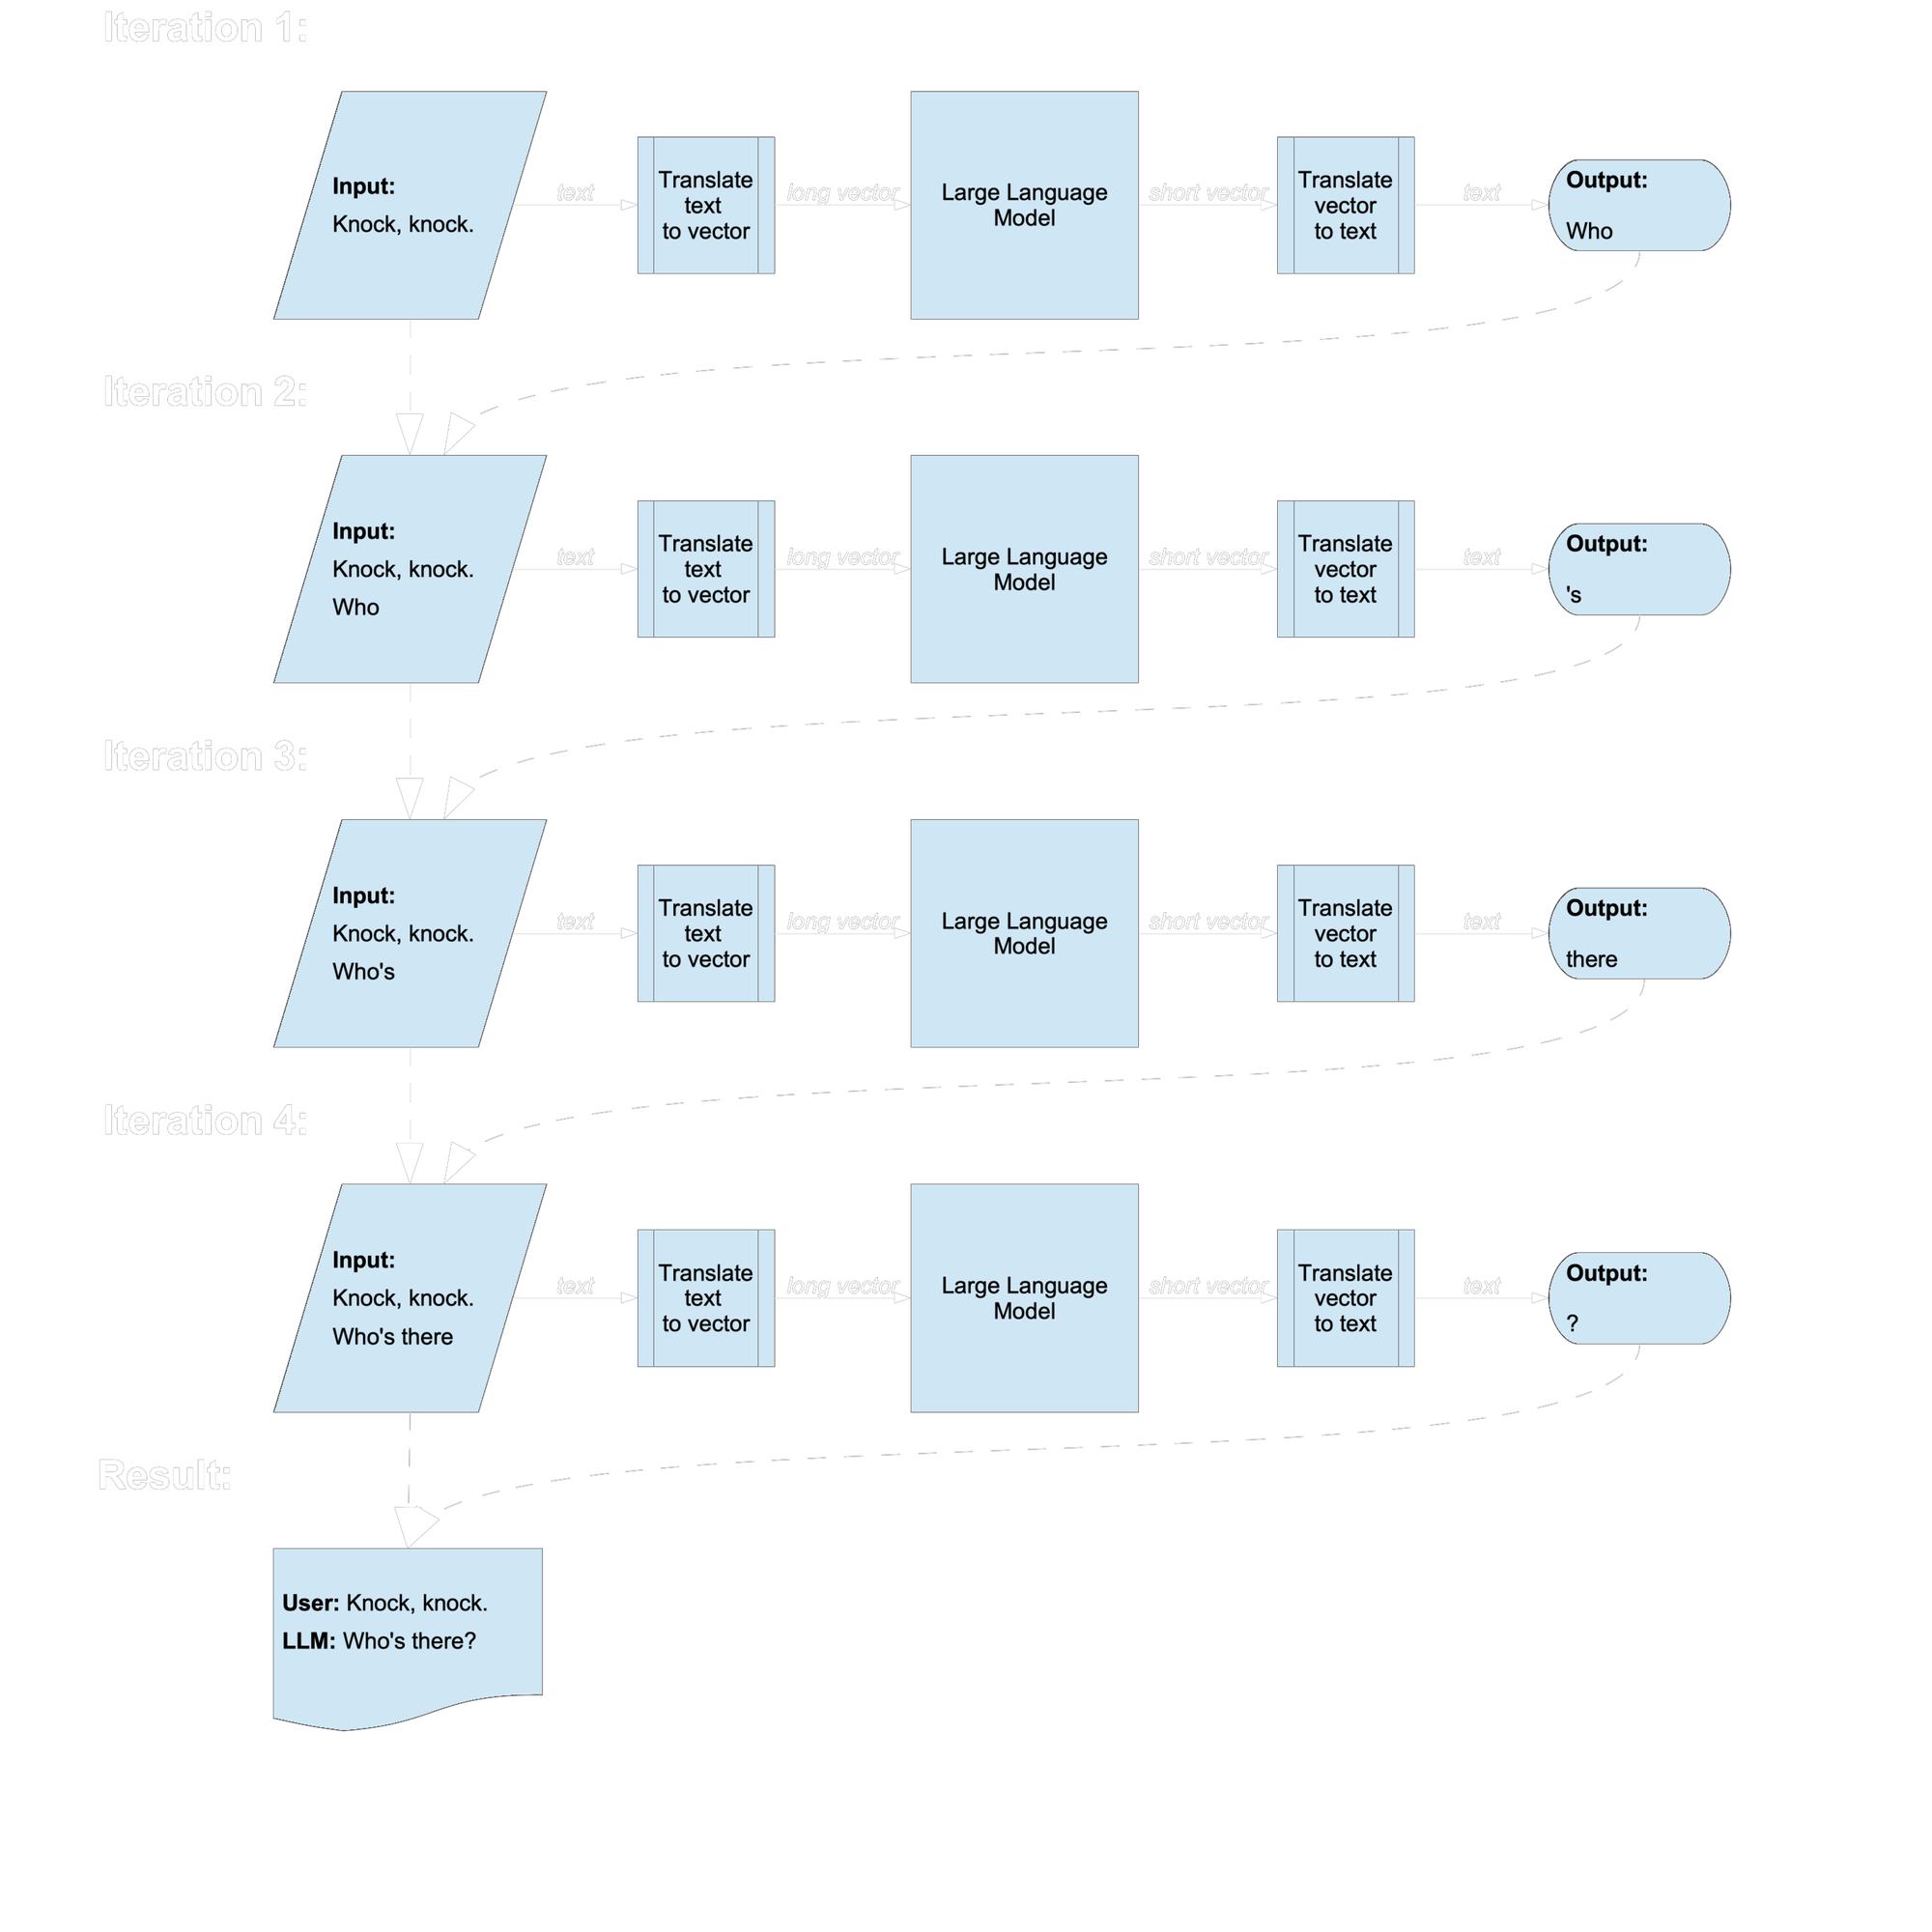 Flowchart on black background depicting an iterative dialogue process with inputs, translations, and outputs involving a conversation with a language model